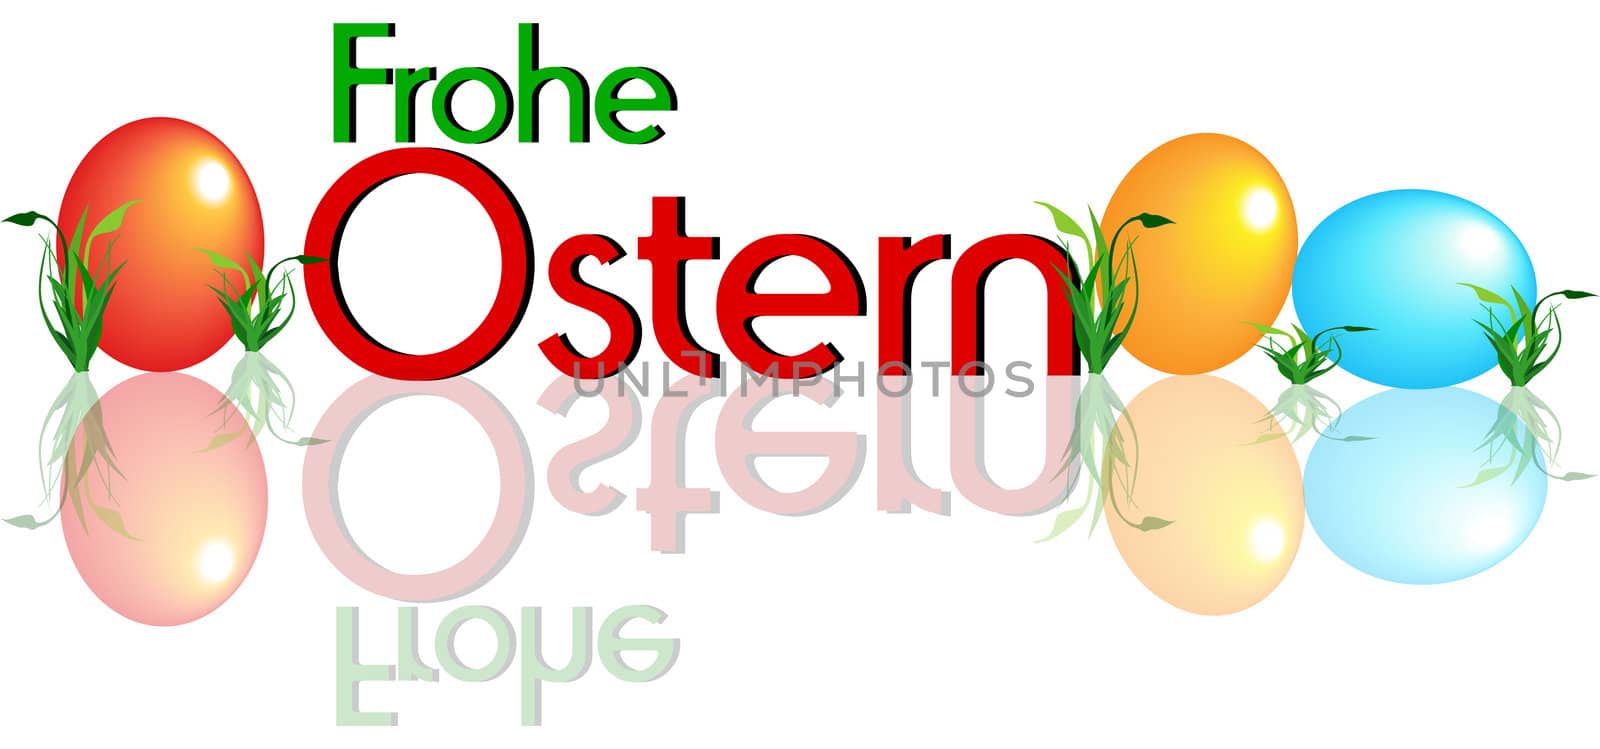 German Happy Easter - Frohe Ostern by peromarketing